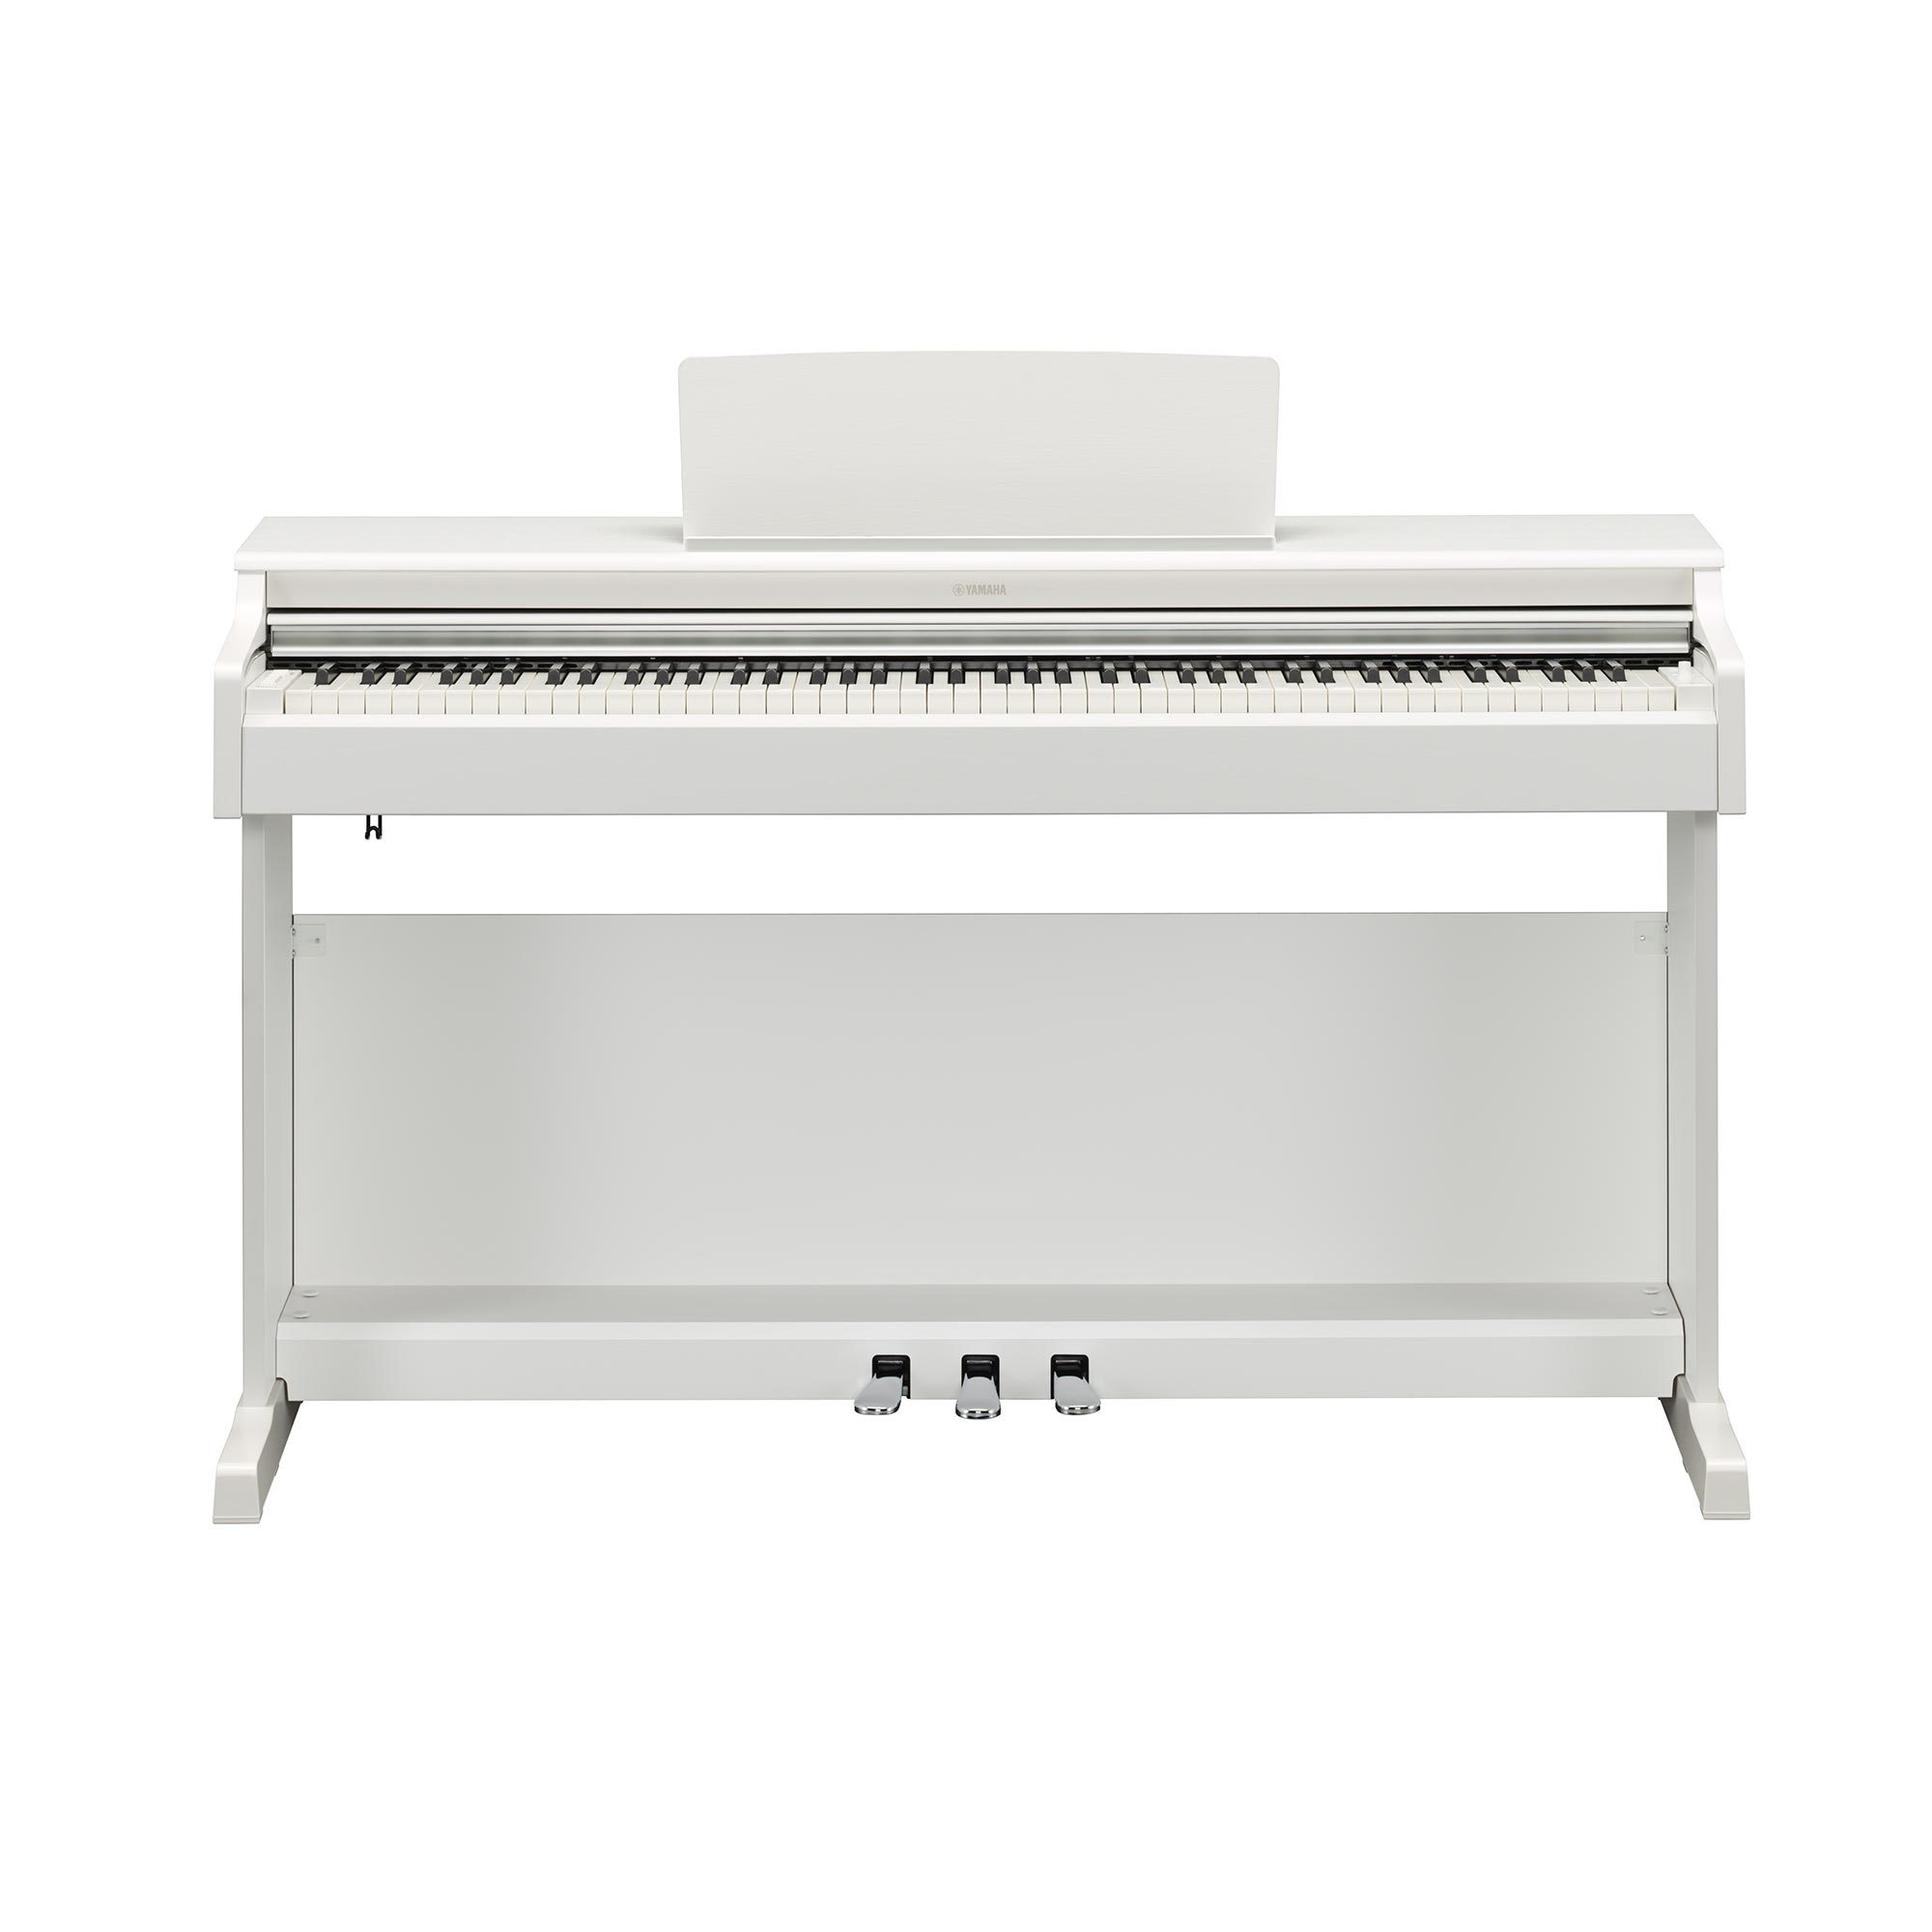 YDP-165 - Overview - ARIUS - Pianos - Musical Instruments - Products -  Yamaha - Other European Countries